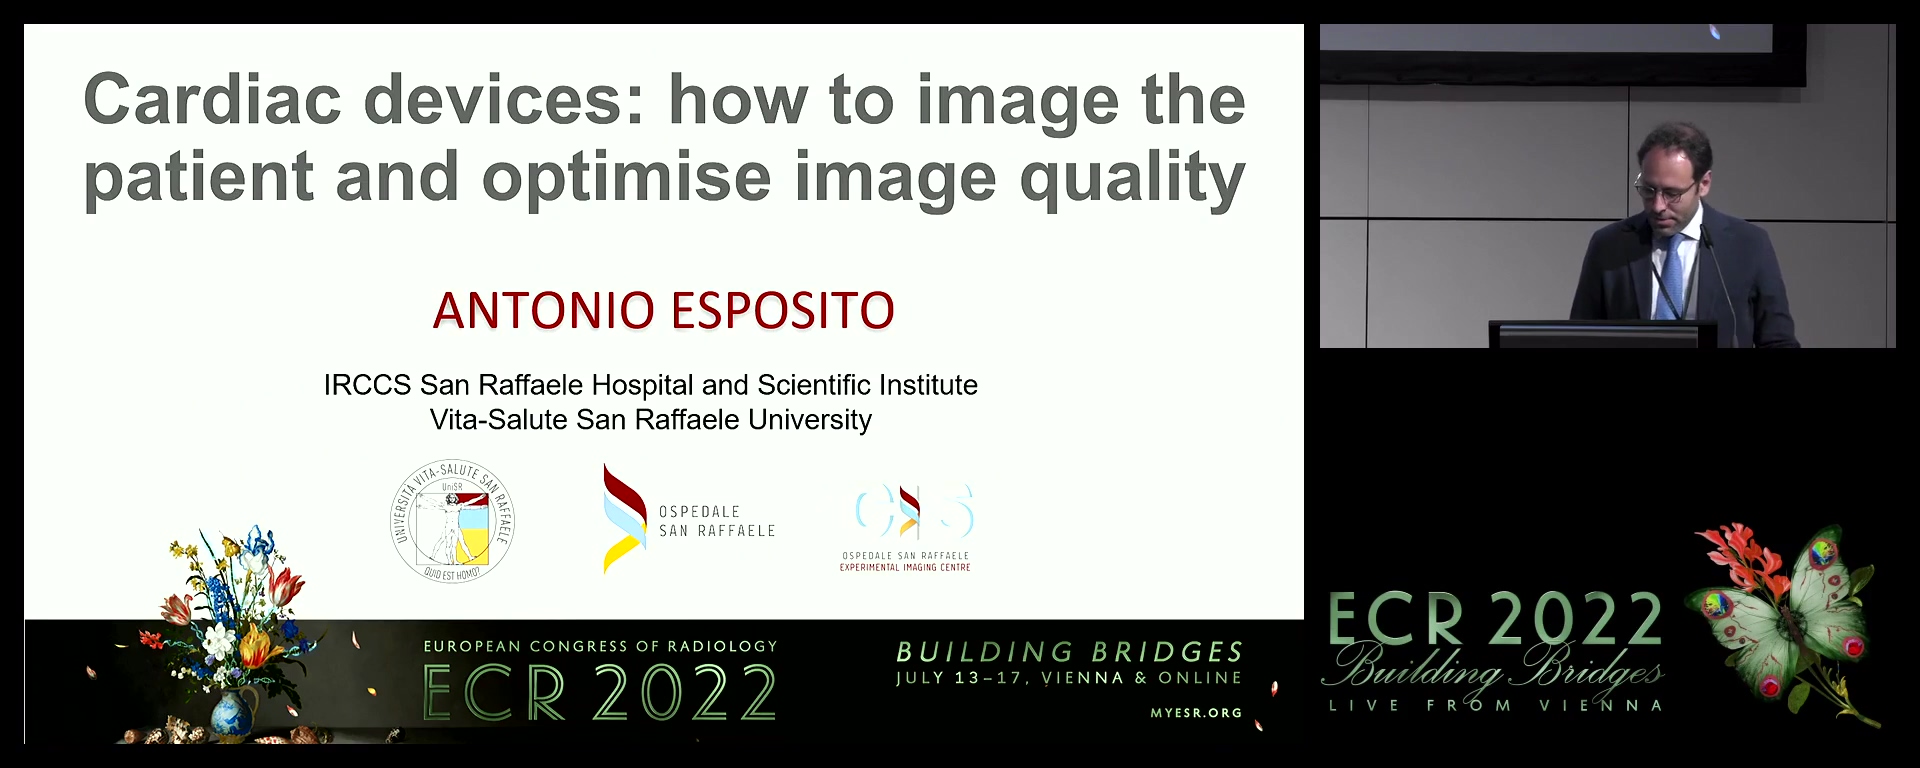 Cardiac devices: how to image the patient and optimise image quality